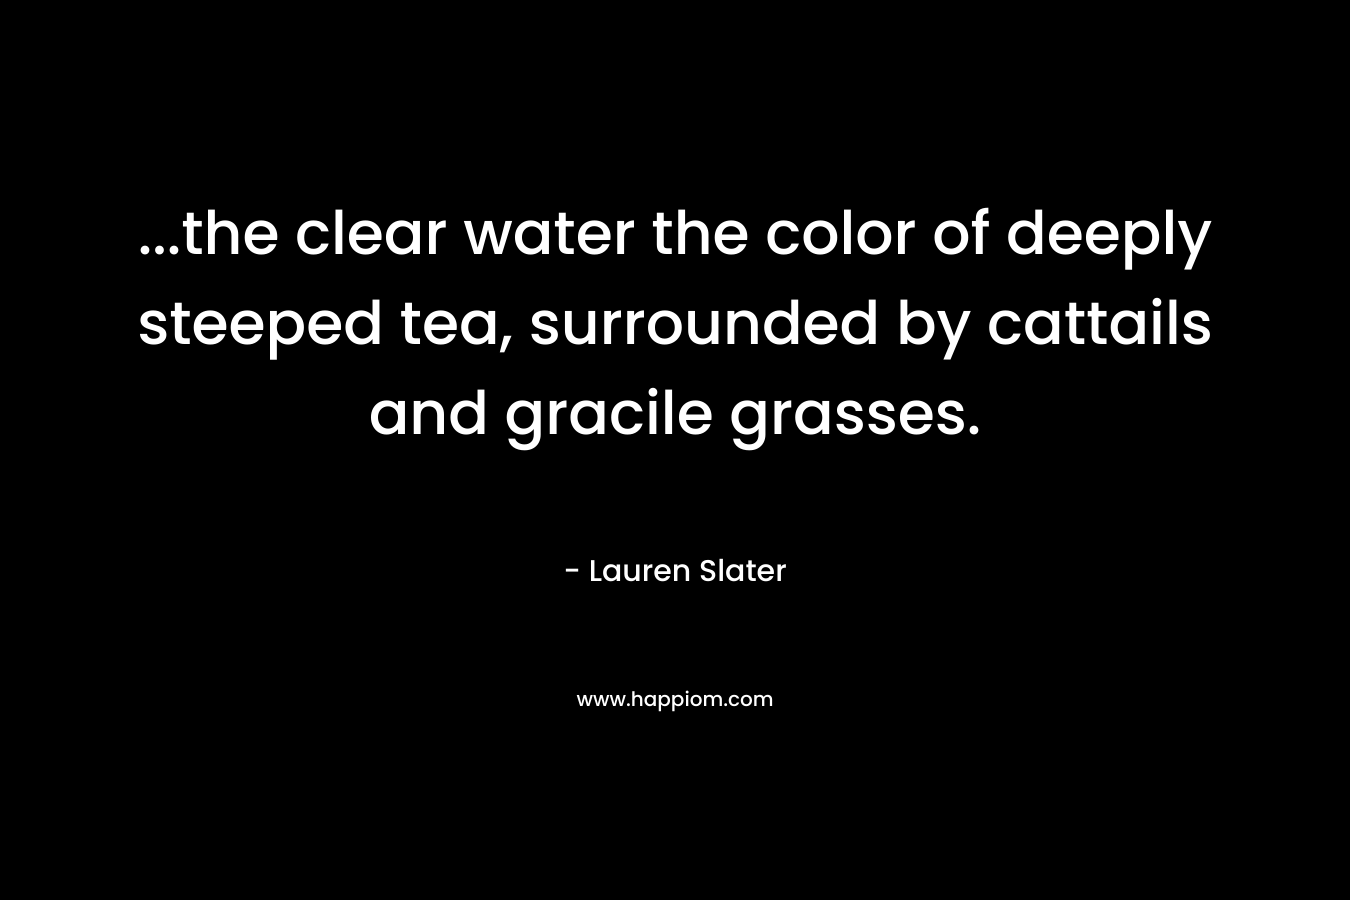 …the clear water the color of deeply steeped tea, surrounded by cattails and gracile grasses. – Lauren Slater